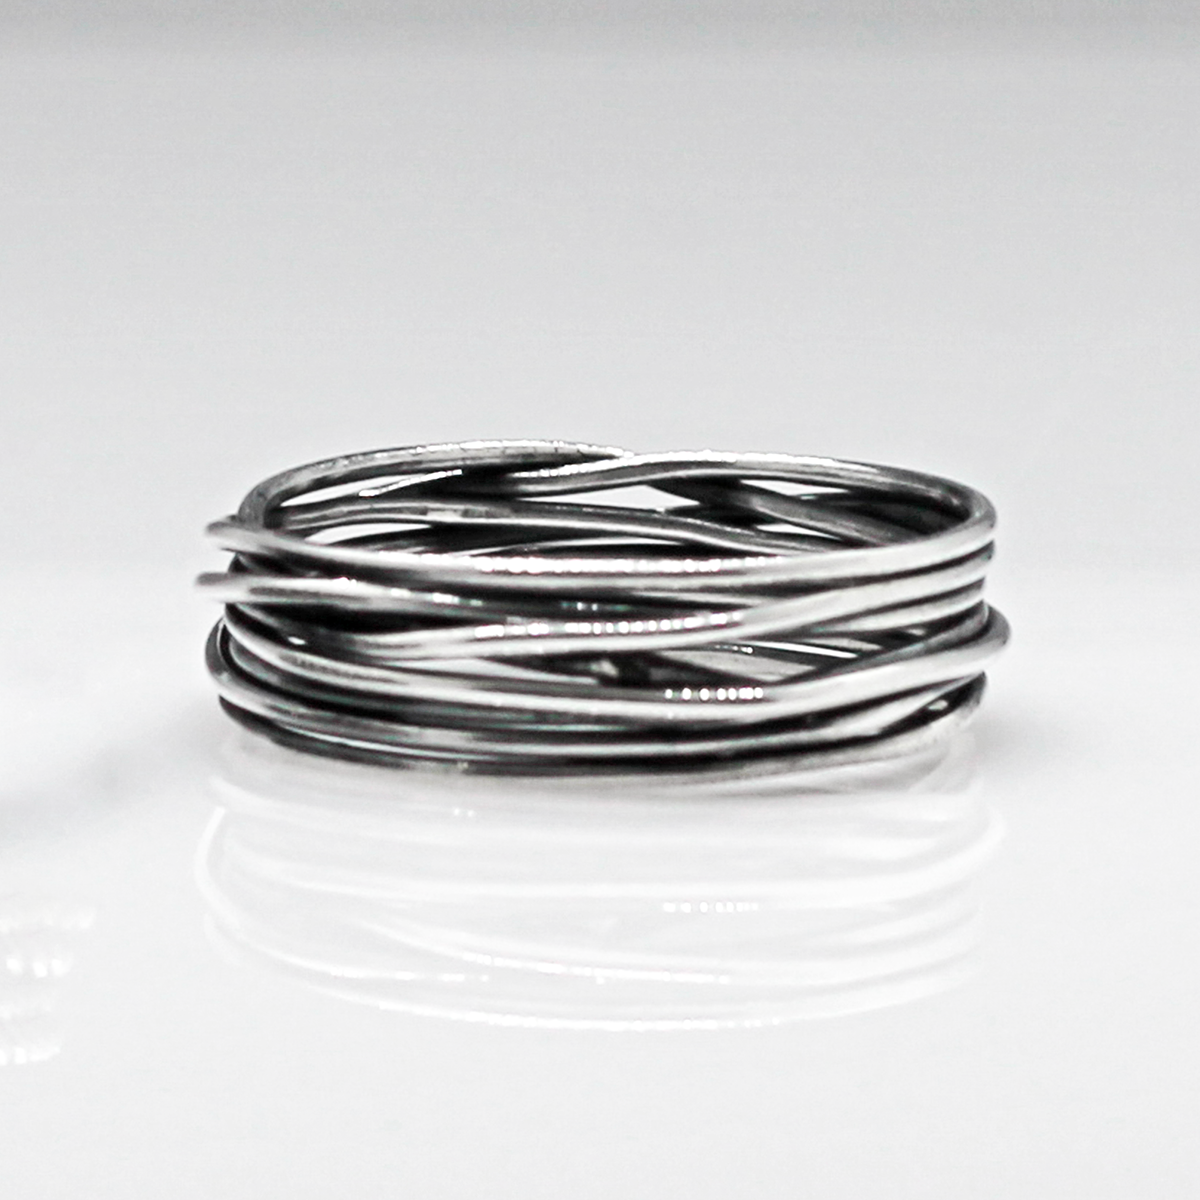 Aran - Lasso S Oxidised Silver Ring. Inspired by lasso rope designs, this piece offers a unique twist to your style.  Crafted with oxidized sterling silver and featuring a comfortable 6mm band width, it's perfect for wearing solo or stacking with other rings to make a statement.